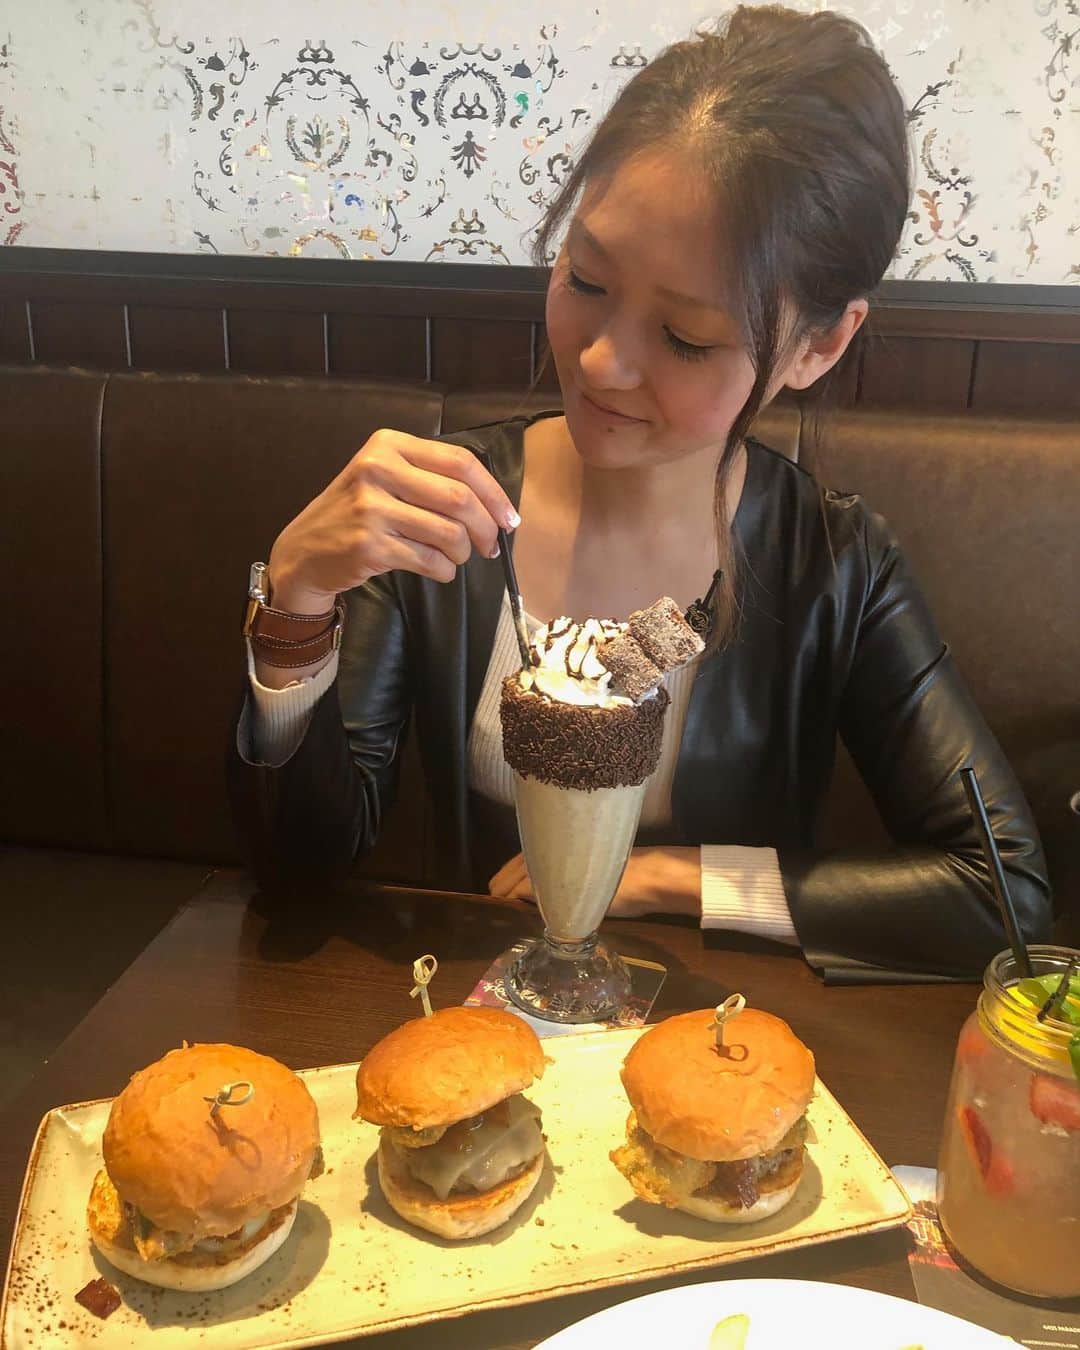 Sayaka.Mさんのインスタグラム写真 - (Sayaka.MInstagram)「. AD I had lunch at Hard Rock Cafe in Ueno and the Hamburger with topics was quite delicious ❣️ This is my favorite hard rock cafe menu I've ever eaten😌✨ Although it was BIG size, I ate it effortlessly.  Three burger series were easy to share! Avocado fry was delicious. The cute drink contains vanilla vodka and has chocolate on the cup. Hard Rock Cafe is currently running a sweepstakes to giveaway 25 ~ 100 $ gift certificates to @hrcuyenoekitokyo. ============================== To enter:  1) Follow @hrcuyenoekitokyo 2) Follow @insta.sayaka 3) Leave a comment tagging a friend to go to Hard Rock Cafe with you ============================== The Ueno store is easy to visit, and many guests ordered hamburger sets and steak sets at lunch, so I would like to try those next @hrcuyenoekitokyo #hardrockcafe #sweepstakes #HardRockCafeOfficial Sweepstakes Rules can be found here: https://izea.it/aYCmwhn . 先日は上野のハードロックカフェでランチ ボリュームたっぷりのバーガー🍔がかなり美味しかったんです❣️ ハードロックカフェのロンドン一号店で最初に出たメニューにインスパイアされた、オーソドックスな組み合わせの中にハードロックカフェらしさがあるバーガーは、今まで食べたハードロックのメニューで私的に一番好きかも😌✨ しっかりとしていながらも、しつこさがなくかなりのBIG sizeなのにペロッと食べちゃいました。 3つのバーガーシリーズはシェアしやすくてアボガドフライがまた美味しかったよ 映えなドリンクは🥤バニラウォッカが入っているんです。グラス周りのチョコが可愛い❤️ ハードロックカフェでは今キャンペーンをやっています。皆さん是非是非参加してね✨ 25~100$のギフト券を配布します ============================== 参加方法は ① @hrcuyenoekitokyo をフォロー ②@insta.sayaka をフォロー ②③連れていきたい友達をタグ付けして私のコメント欄にメッセージを残すだけ🤳 ============================== 上野店は入りやすいし、女子のランチのハンバーグセットや、ステーキセット🥩の注文率かなり高かったから私も次食べたいな🤤 . 私の食べ歩きの記録は Gourmet food information 제 외식기록 ↓↓↓ #sayaka動画 . . #ハンバーガー #ハンバーガー部 #ハンバーガー巡り #東京グルメ #東京カフェ #食べ歩き #キャンペーン実施中 #キャンペーン情報 #ハードロックカフェ #ハードロックカフェ東京 #札幌ママ #東京ママ #ueno #上野 #上野グルメ #hamburger #hamburguers #tokyolife #tokyocafe #上野カフェ #料理動画 #東京ランチ #カフェ巡り #カフェご飯 #カフェ好き」6月10日 6時53分 - insta.sayaka